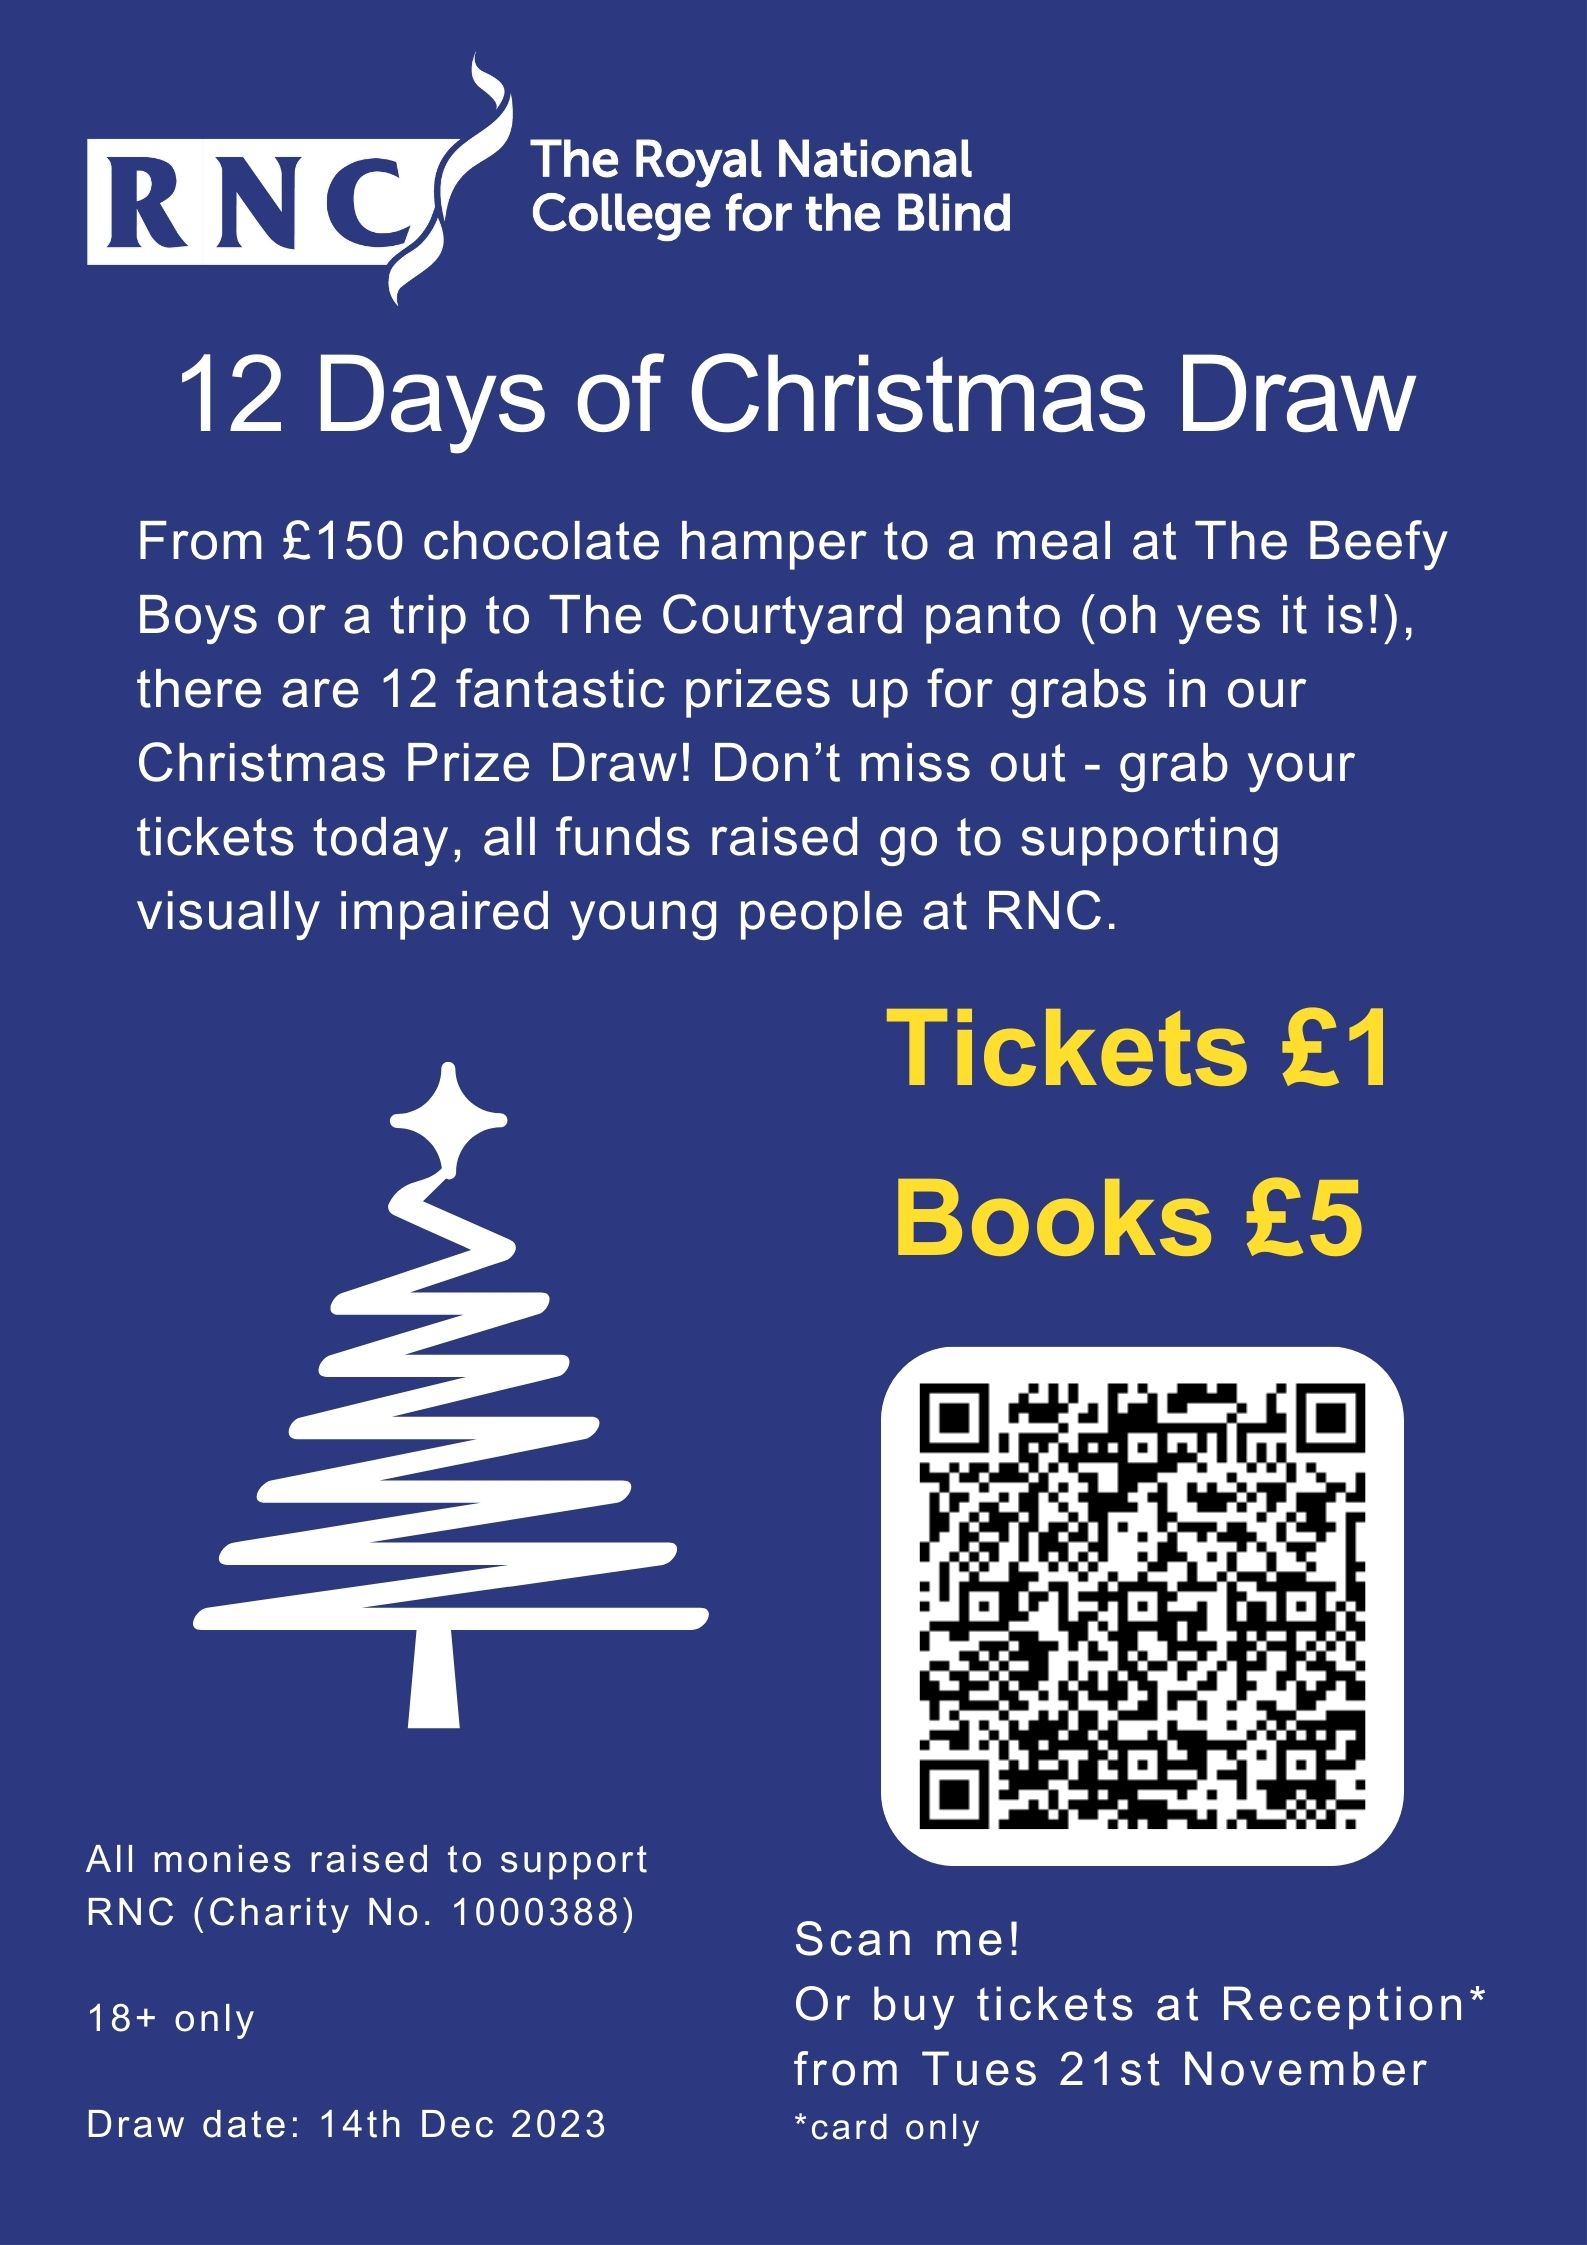 Christmas Raffle Poster with QR code. Details as written in the body of the text